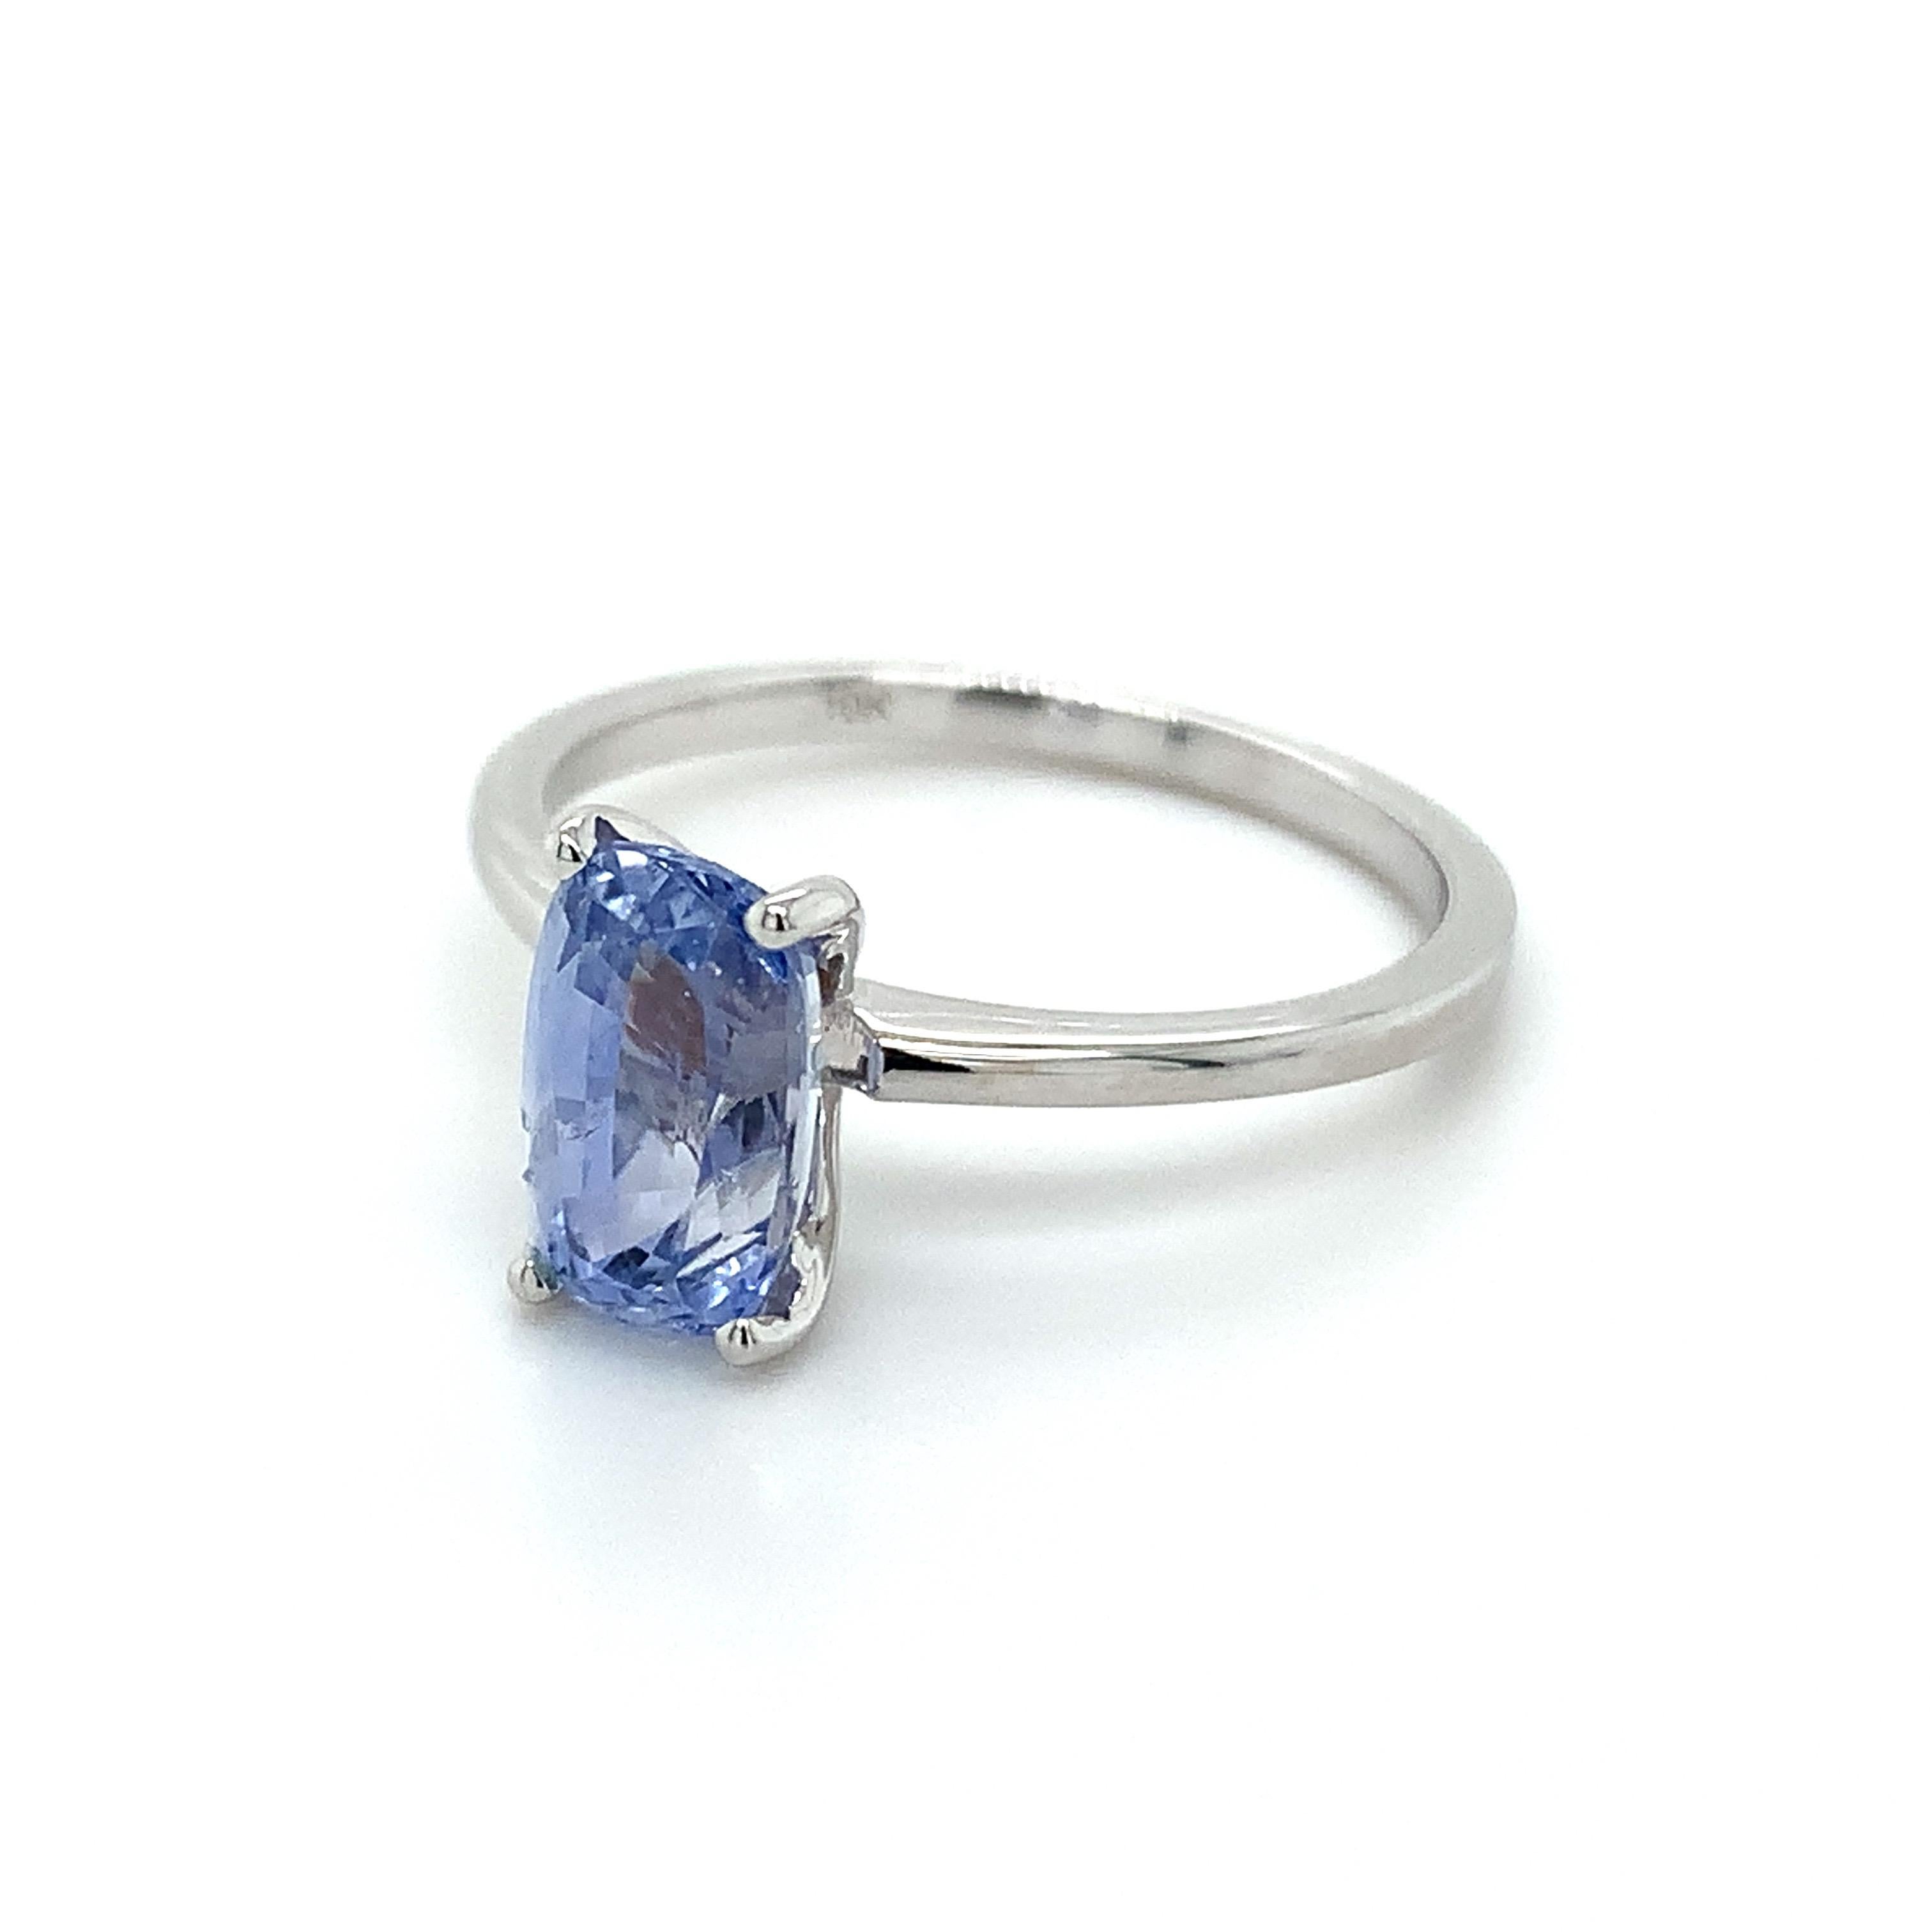 Cushion shape blue sapphire gemstone beautifully crafted in a 10K white gold ring.

A highly precious September birthstone with a delighting blue color. They are believed to bring good luck & fortune in life. Explore a vast range of precious stone